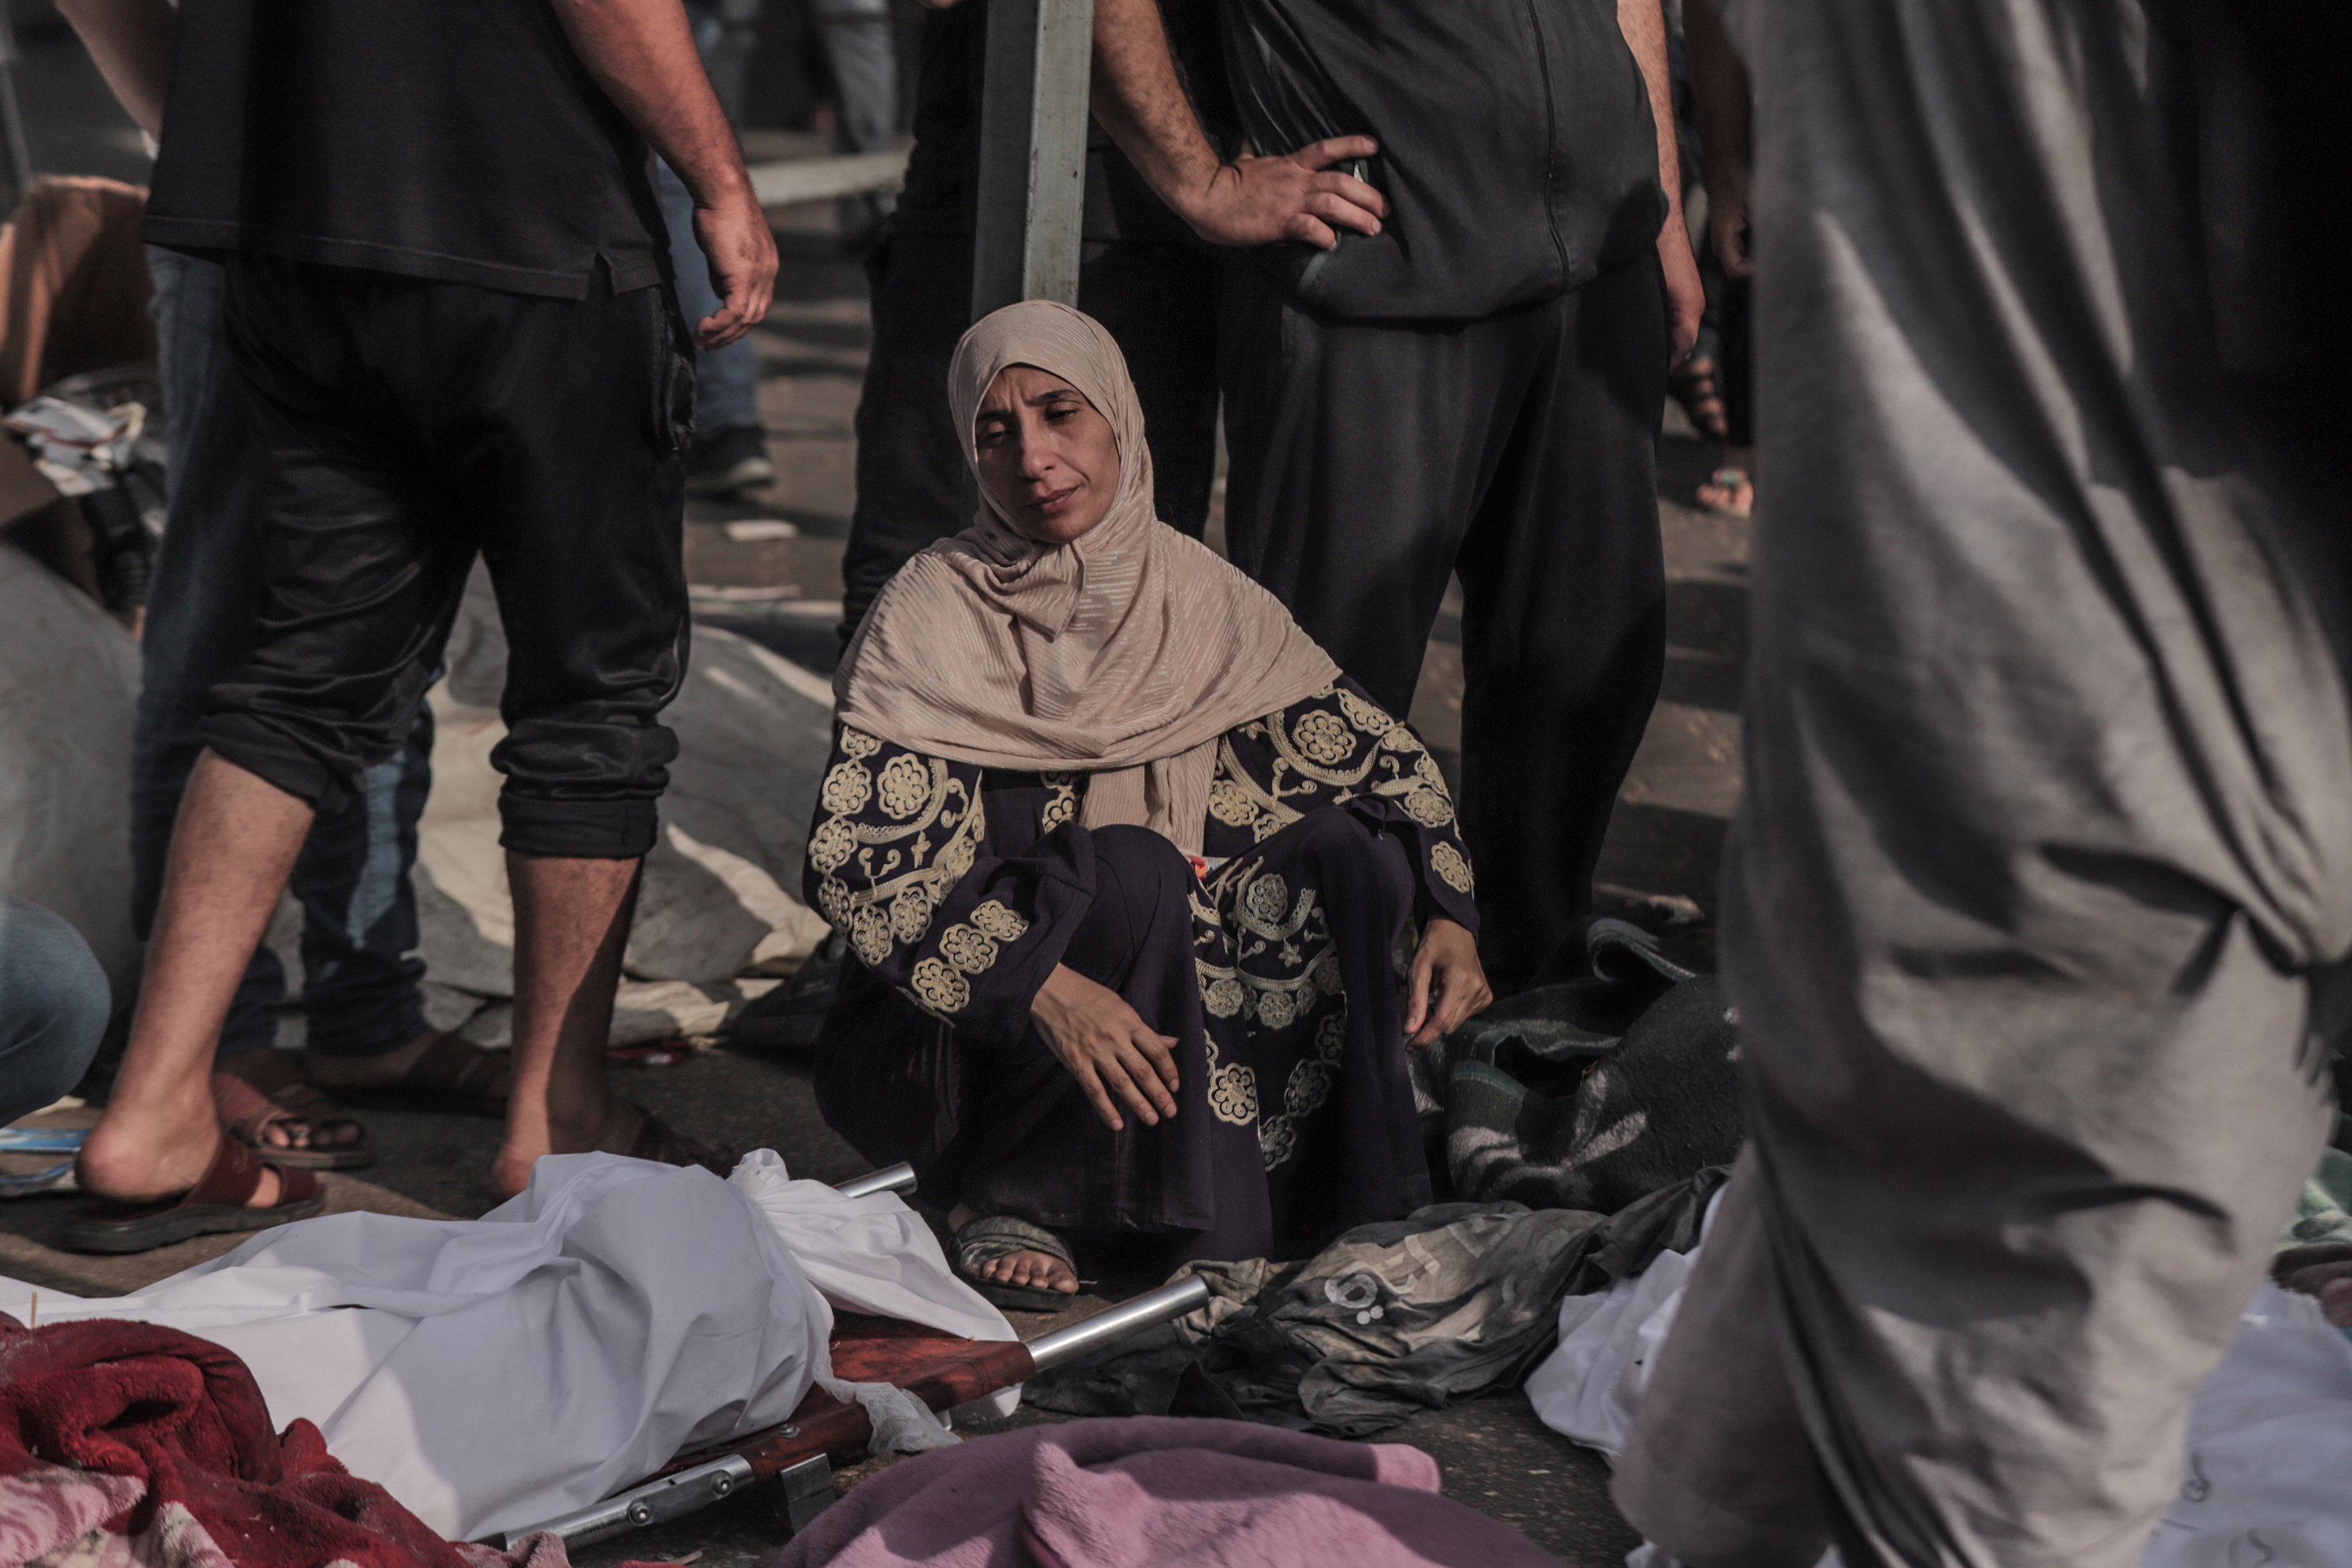 A Palestinian woman inspects the bodies of victims outside Gaza City's Al-Shifa hospital who were killed in Israeli bombardment, on November 8.